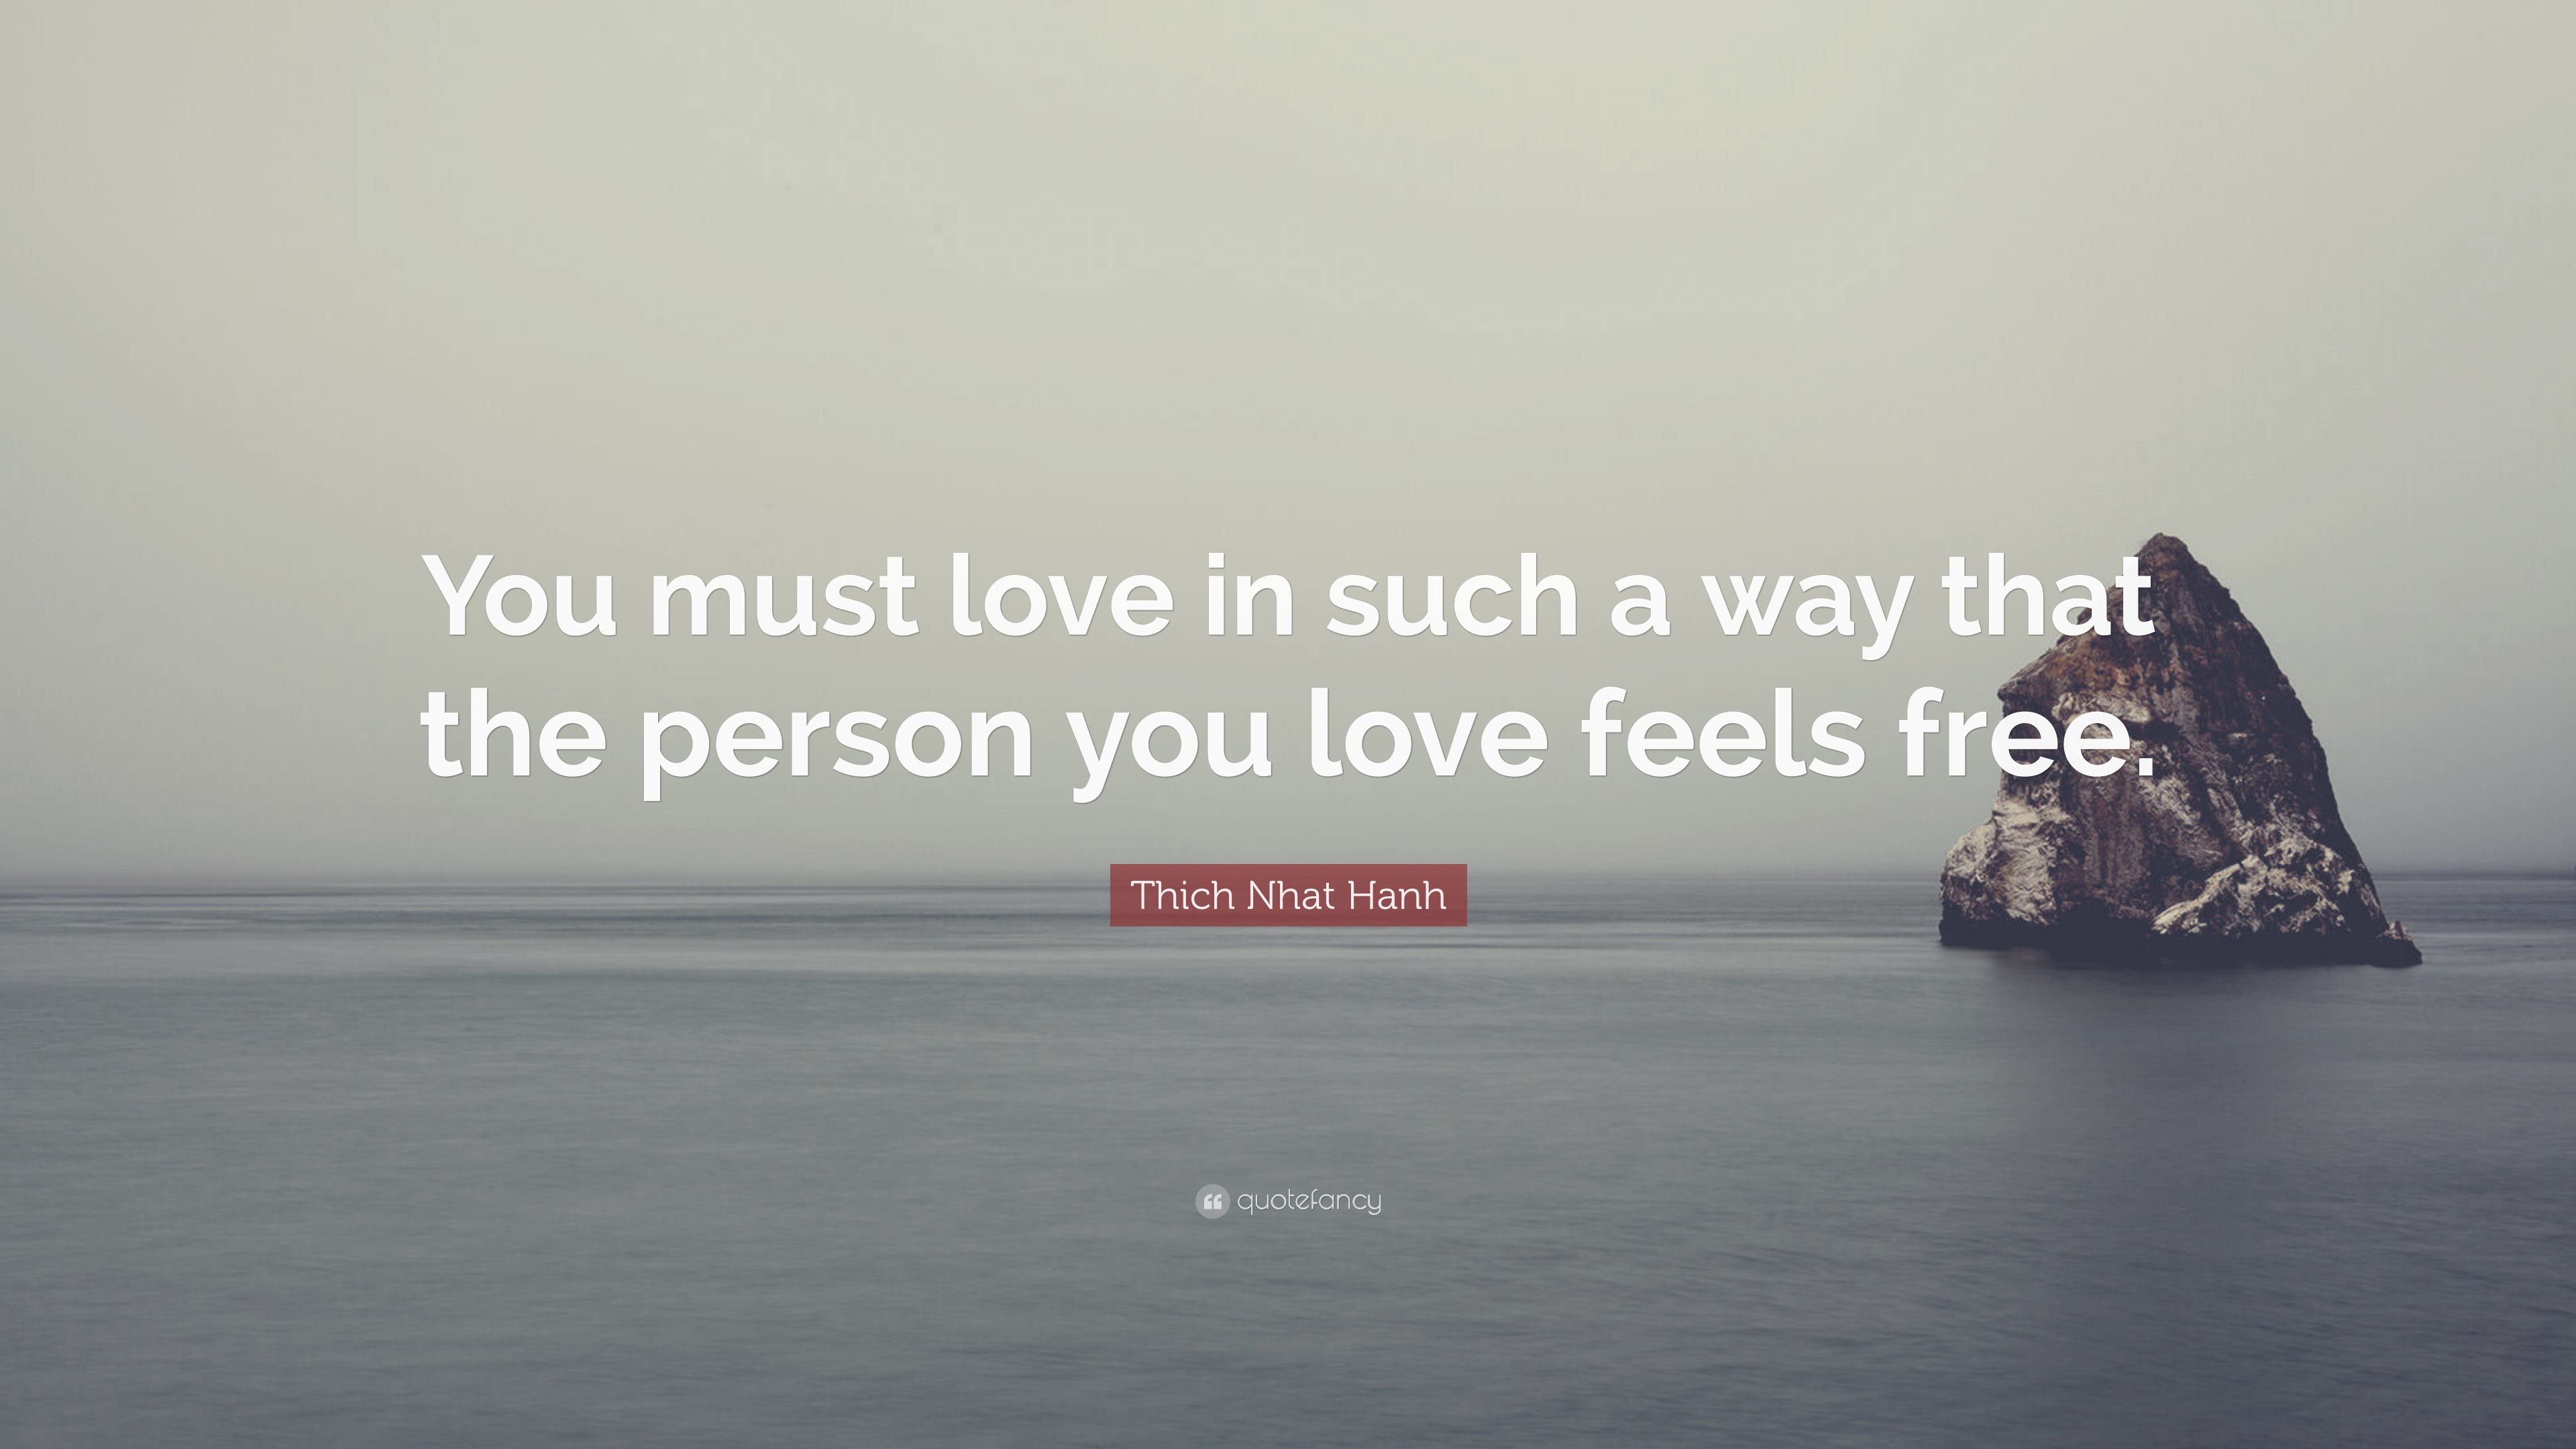 Thich Nhat Hanh Quote: “You must love in such a way that the person you ...